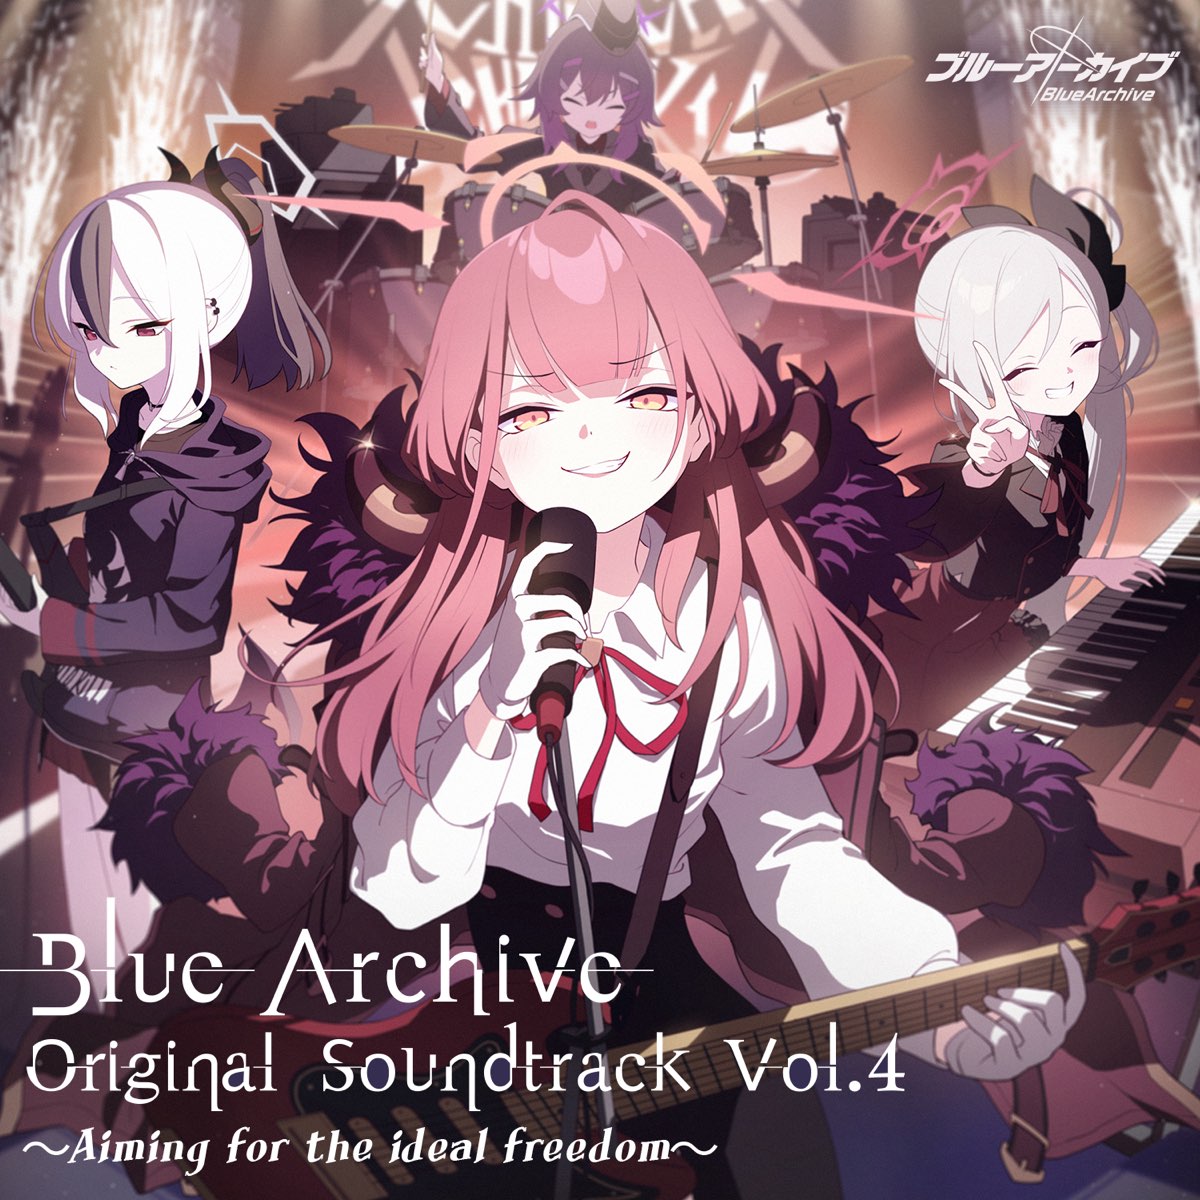 Blue Archive Original Soundtrack Vol.4 ～Aiming for the ideal 